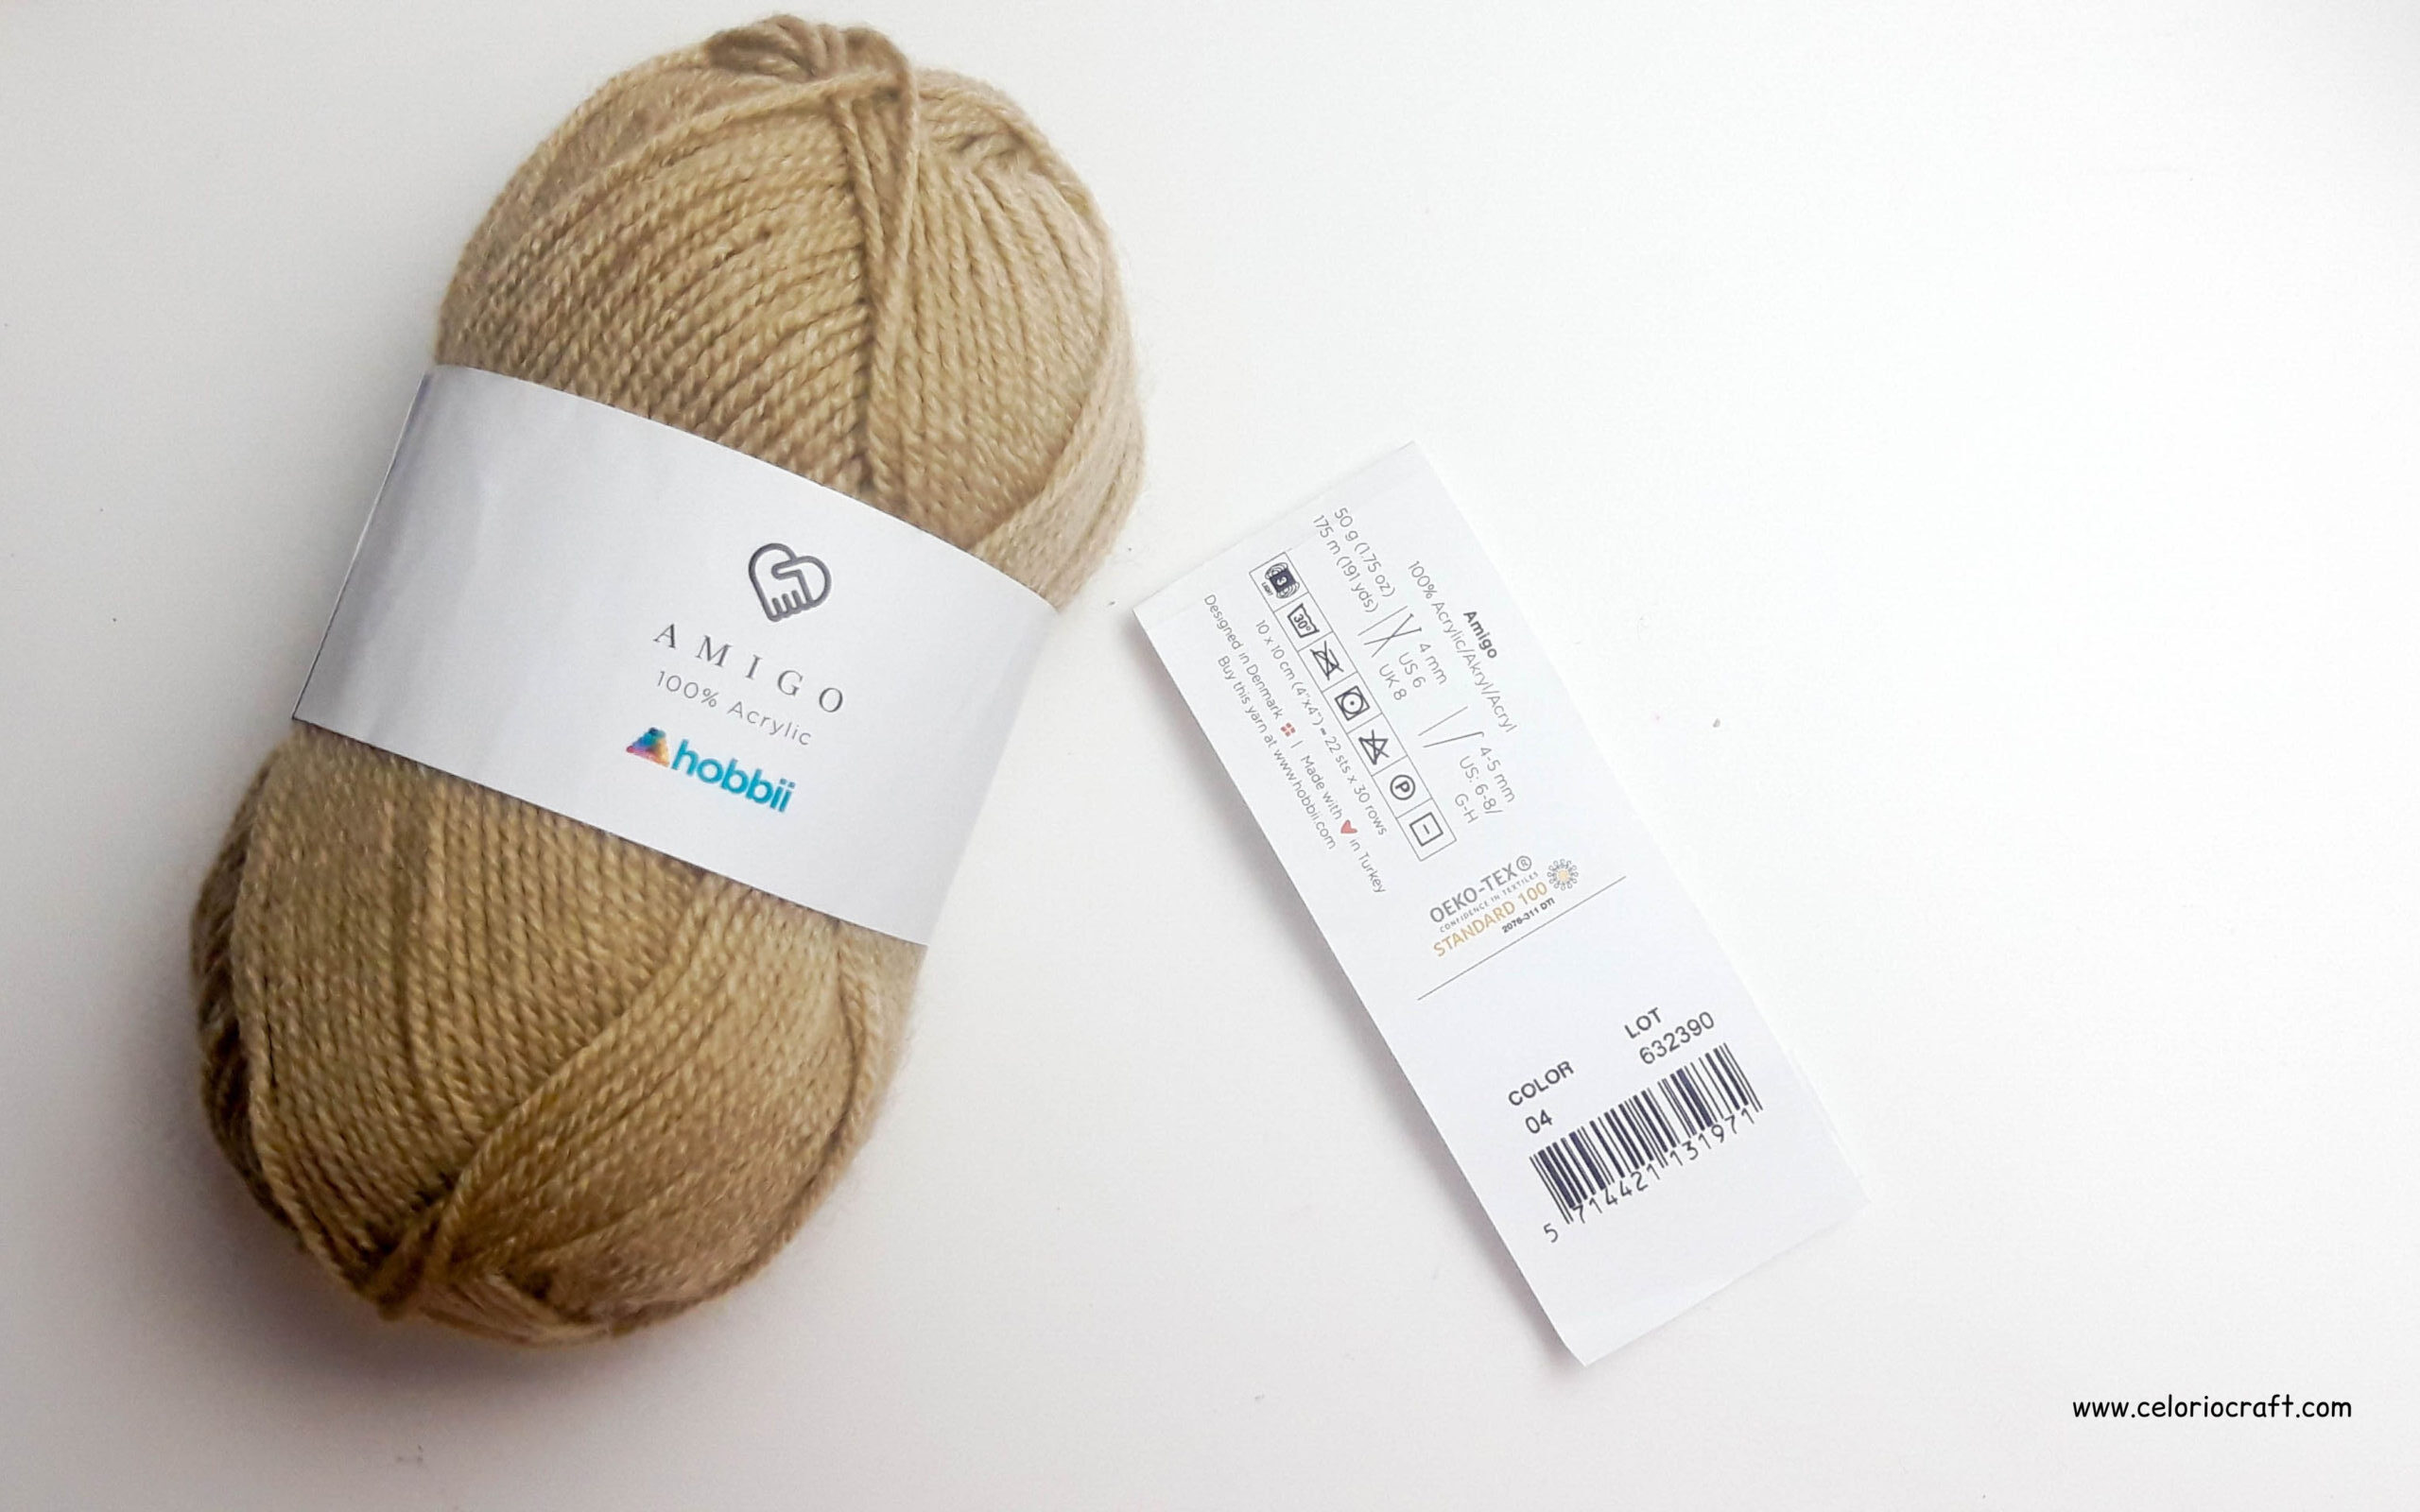 How to understand your yarn label in English and Spanish